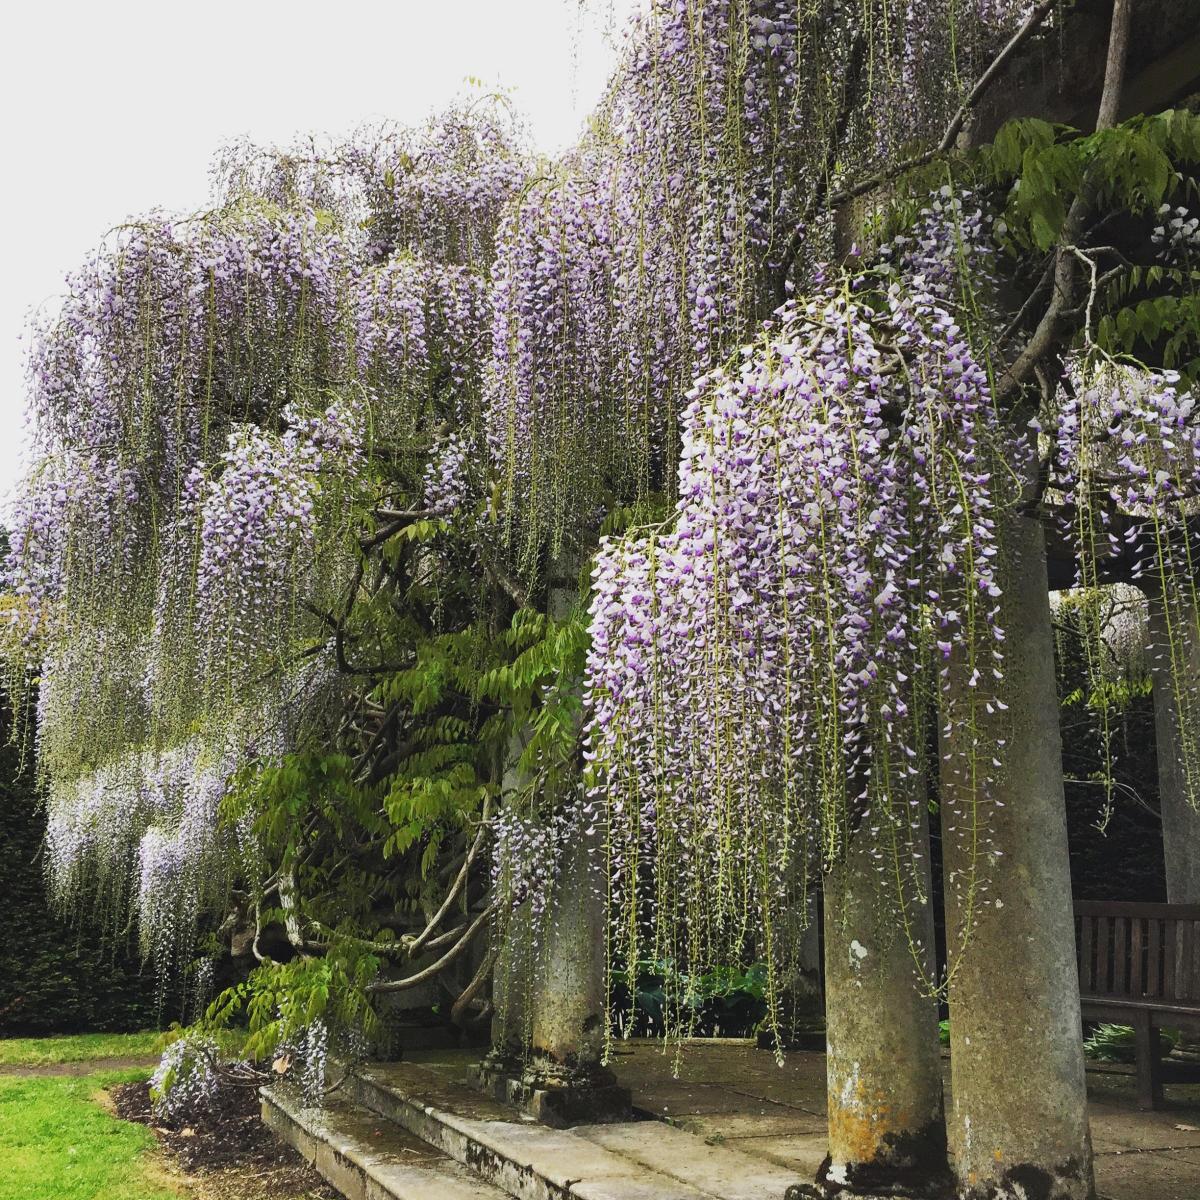 Wisteria in the Sundial Garden by Marie-Louise Agius